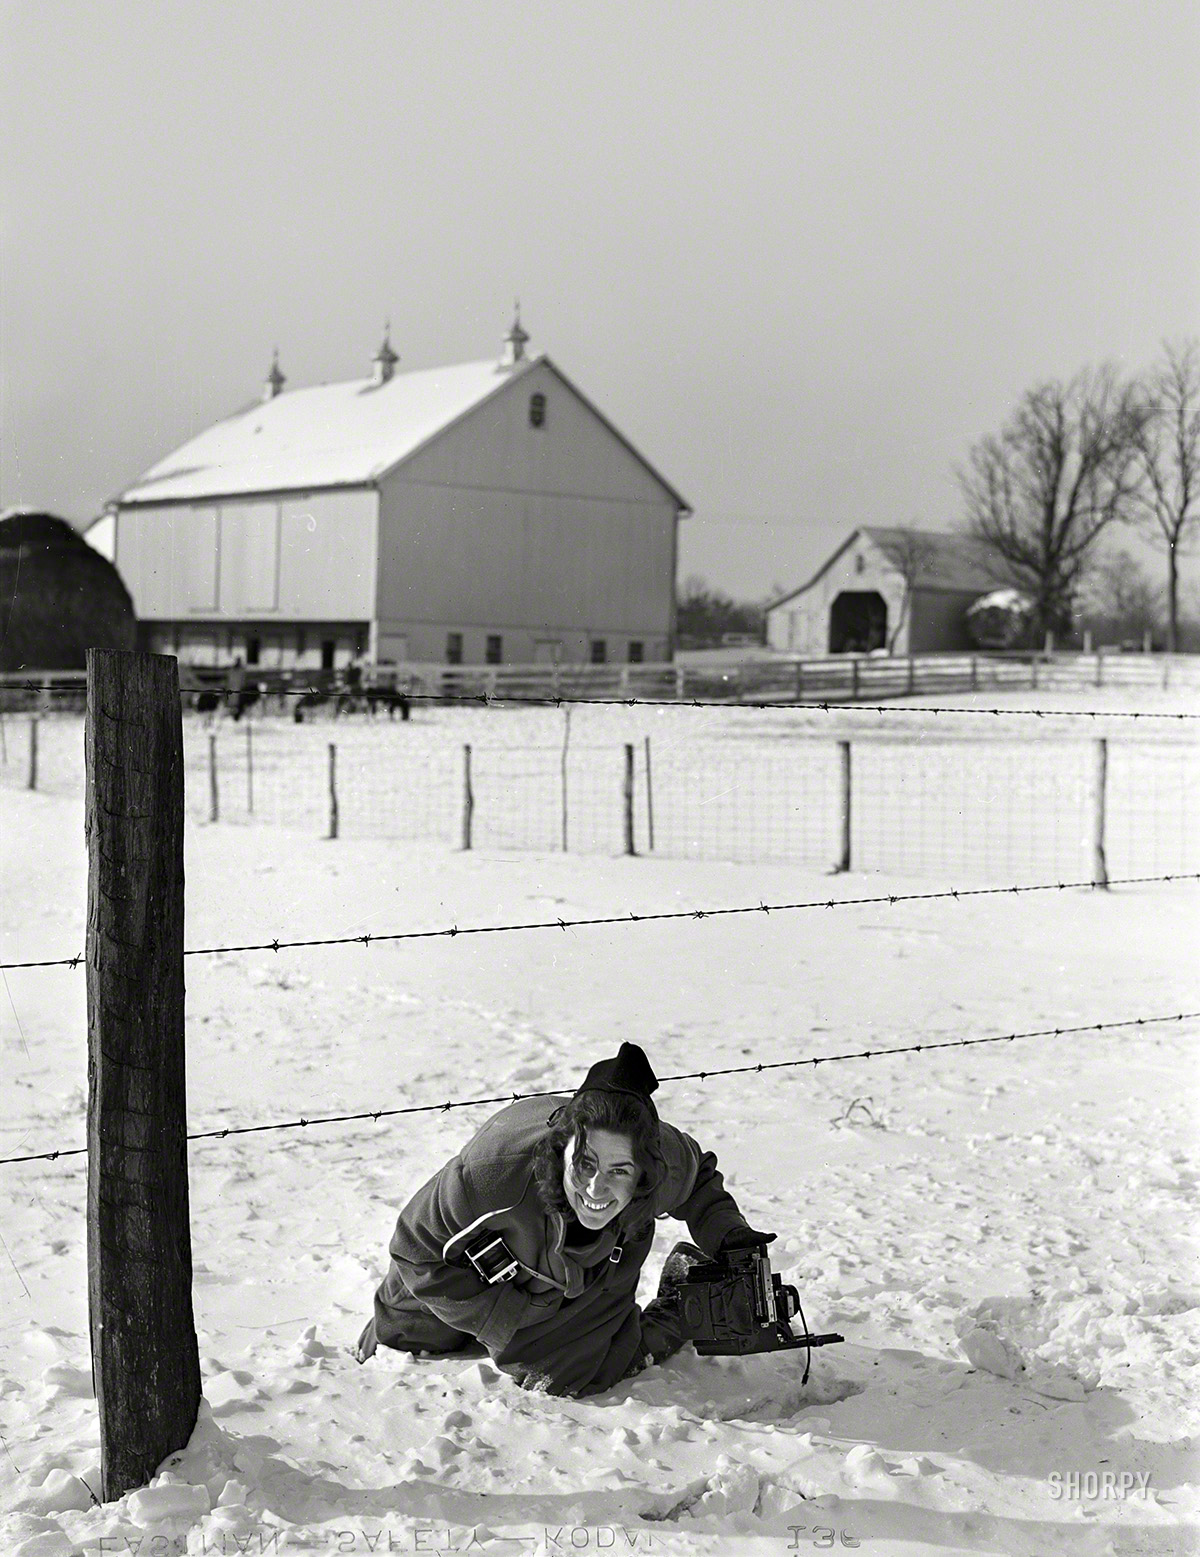 January 1940. "Marion Post Wolcott with Ikoflex and Speed Graphic in hand in Montgomery County, Maryland." Medium format acetate negative by Arthur Rothstein for the Farm Security Administration. View full size.